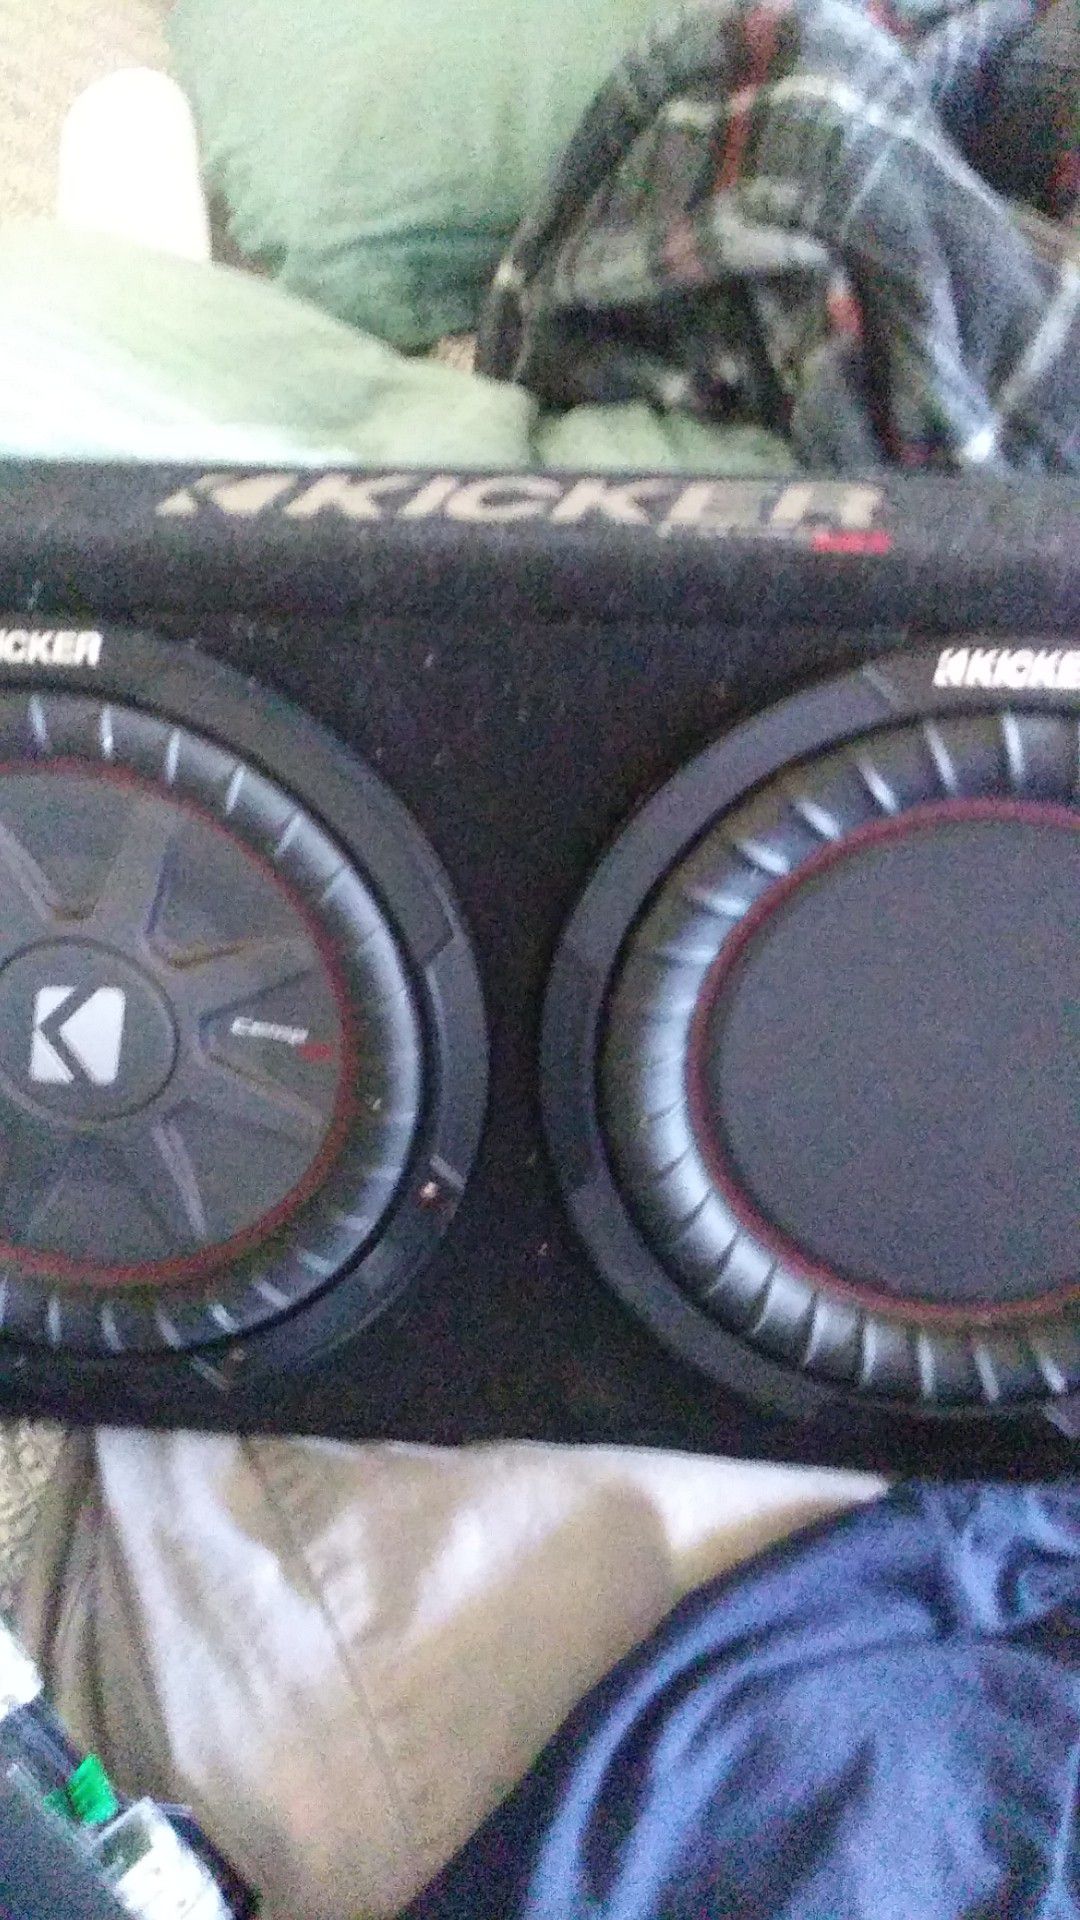 Complete car system with Pioneer touch screen stereo kicker competition rt inner fire a 2 Channel 900 Wat amp excellent deal